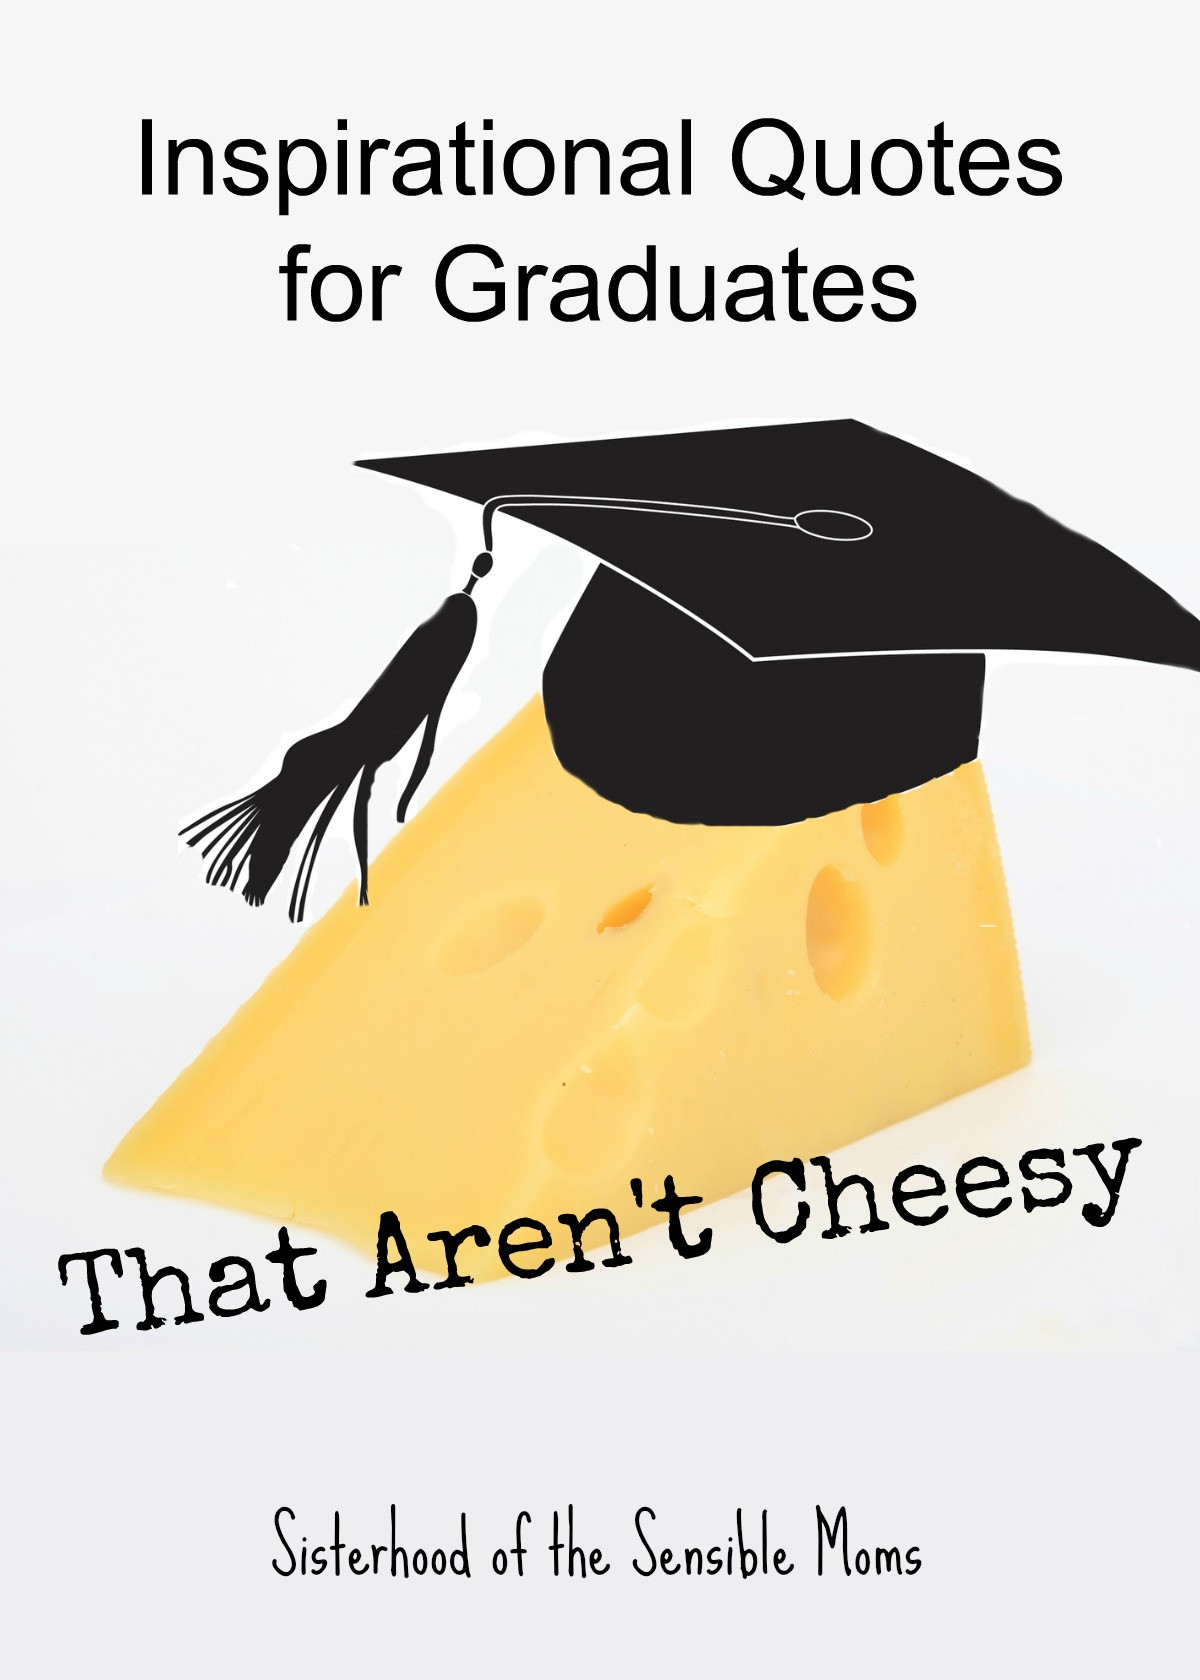 Quotes About Graduation
 Inspirational Quotes for Graduates That Aren t Cheesy